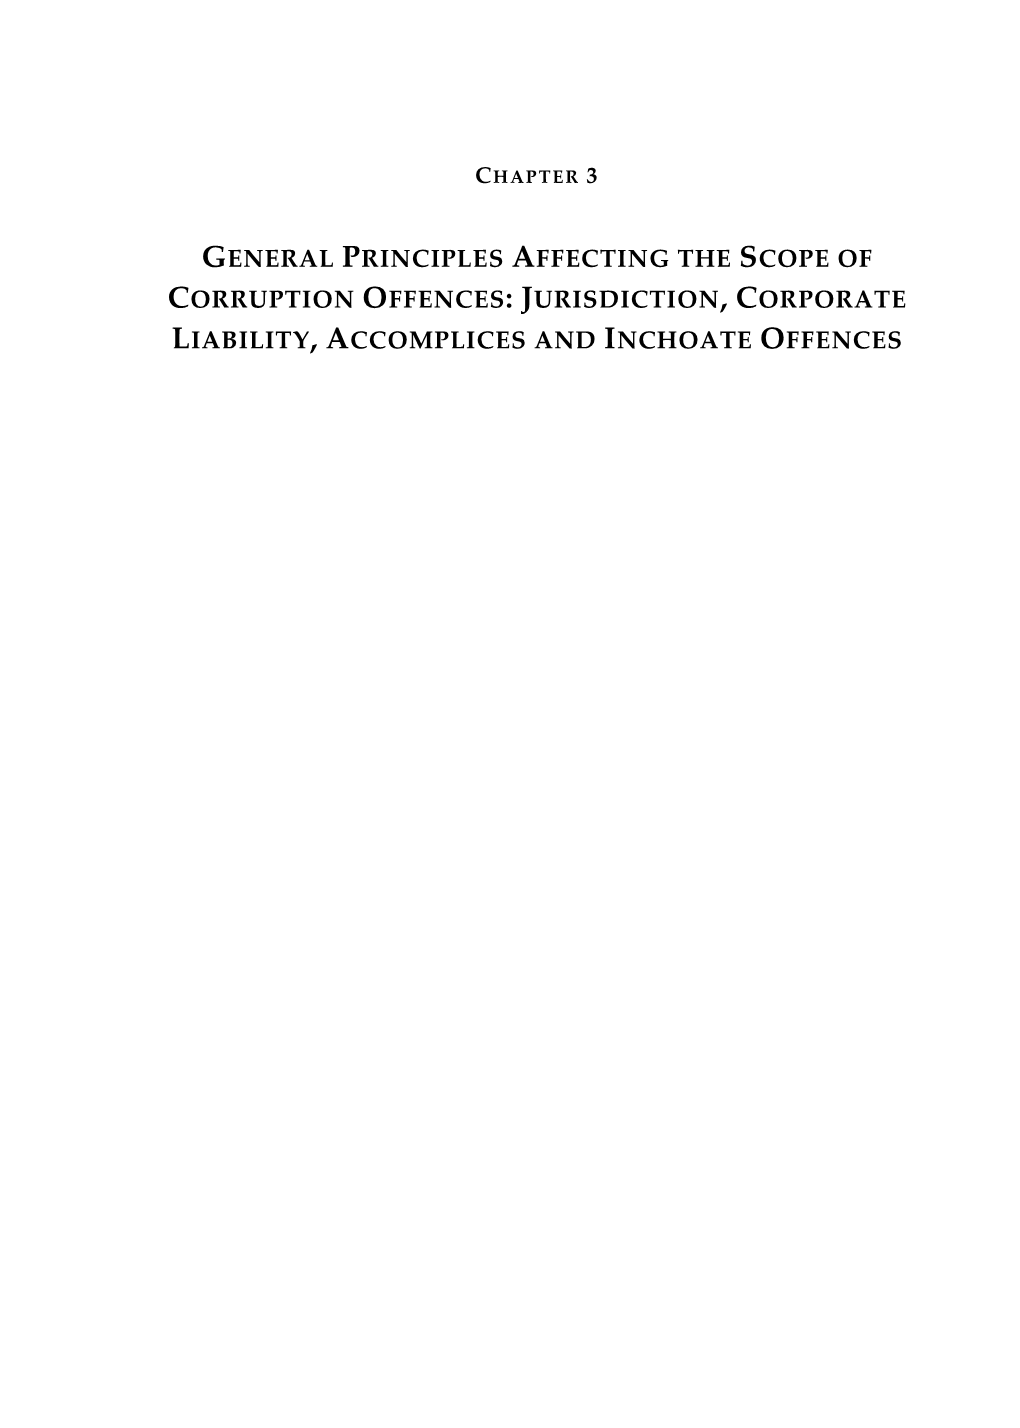 General Principles Affecting the Scope of Corruption Offences: Jurisdiction, Corporate Liability, Accomplices and Inchoate Offences